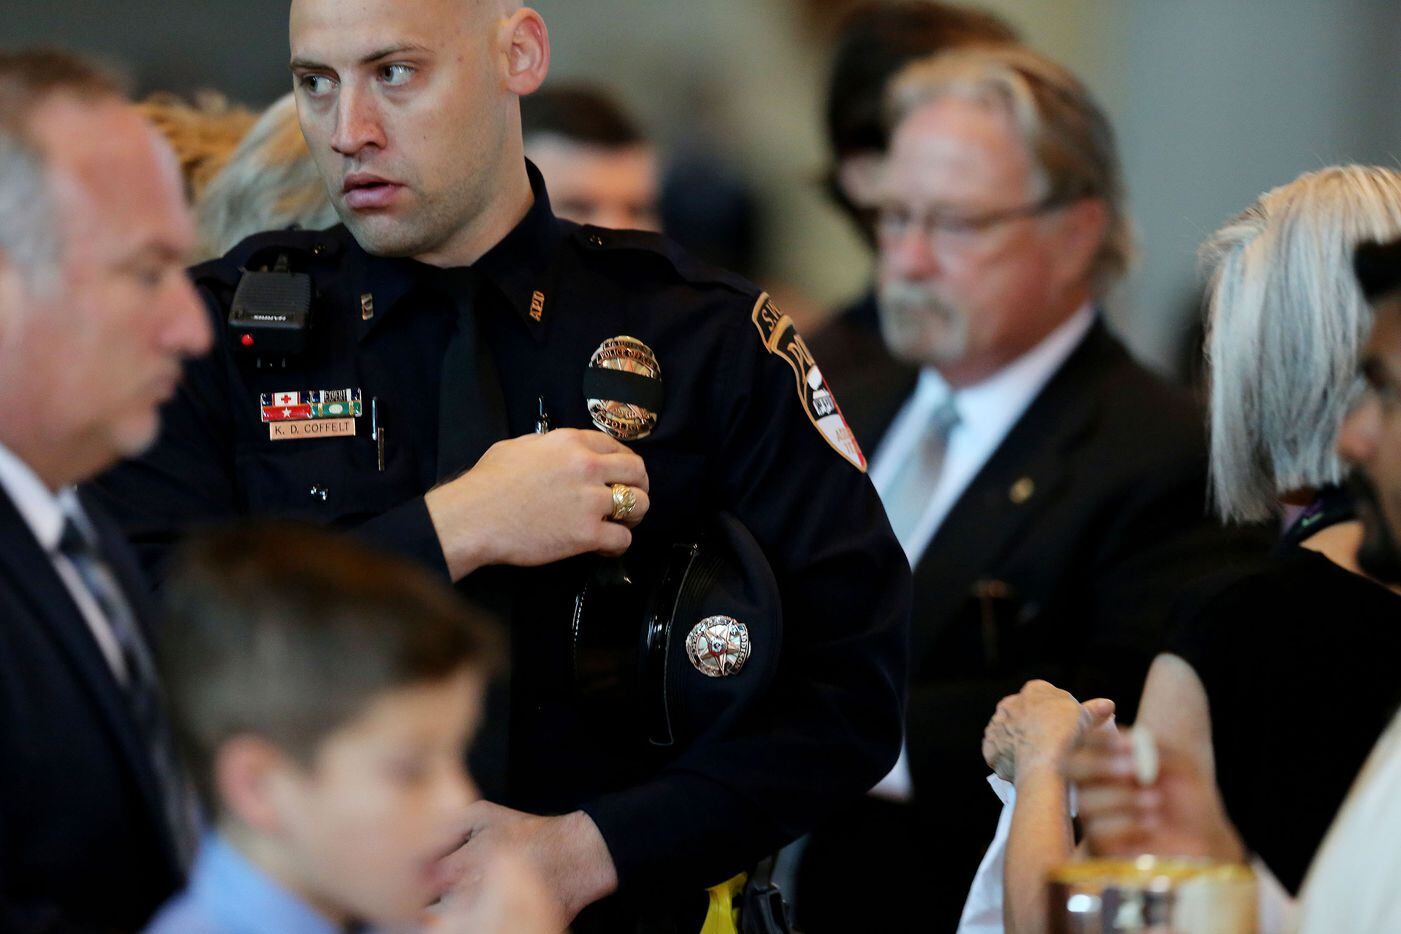 Addison officer Coffelt takes communion during the funeral for Dallas police sergeant Michael Smith.